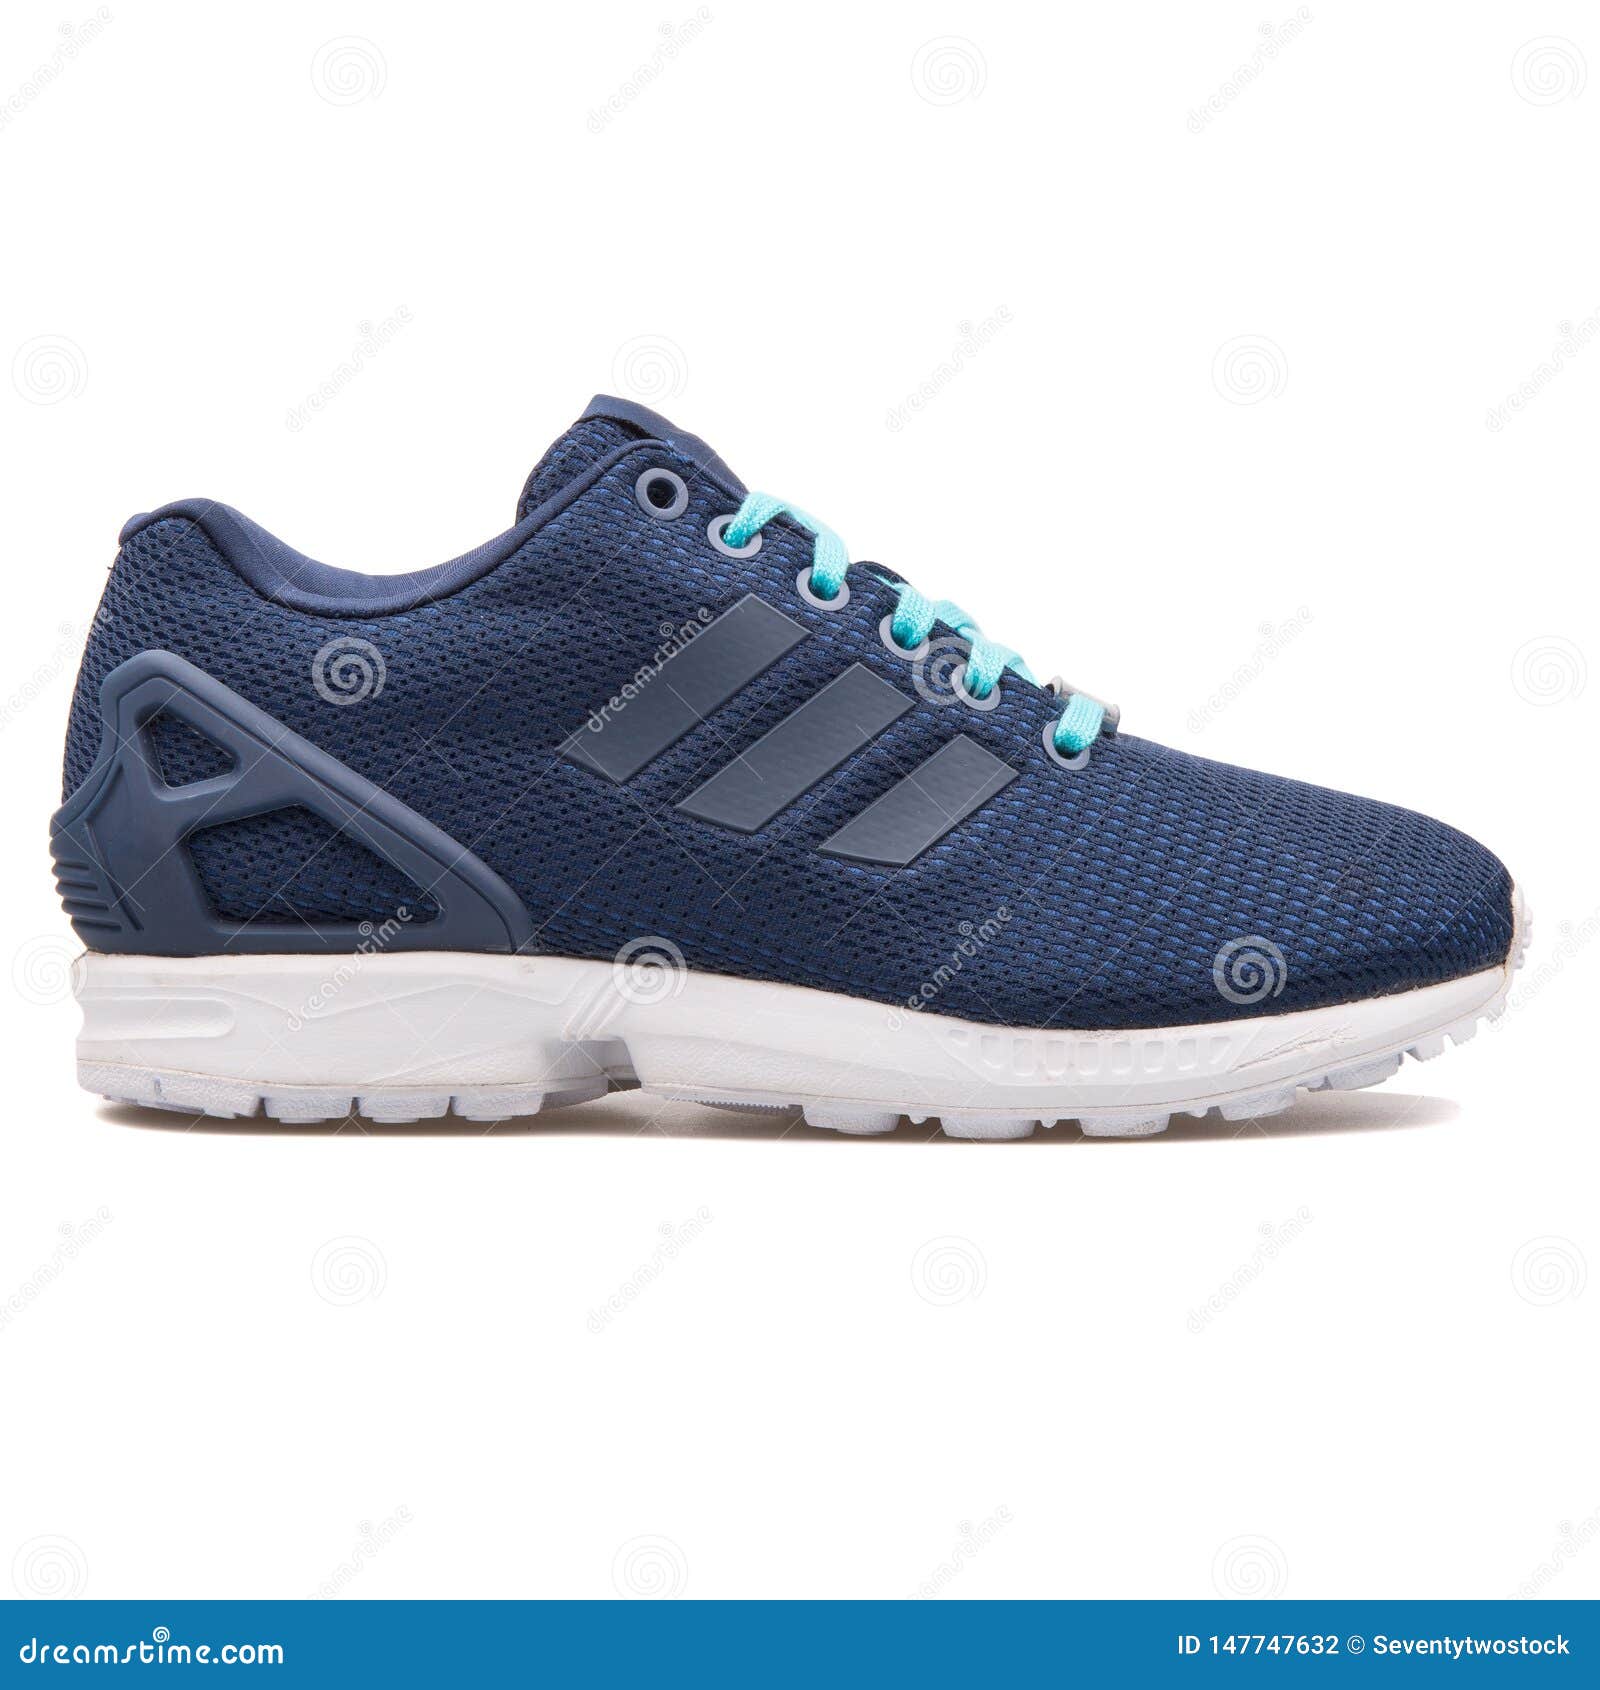 Zx Flux Photos - Free \u0026 Royalty-Free Stock Photos from Dreamstime